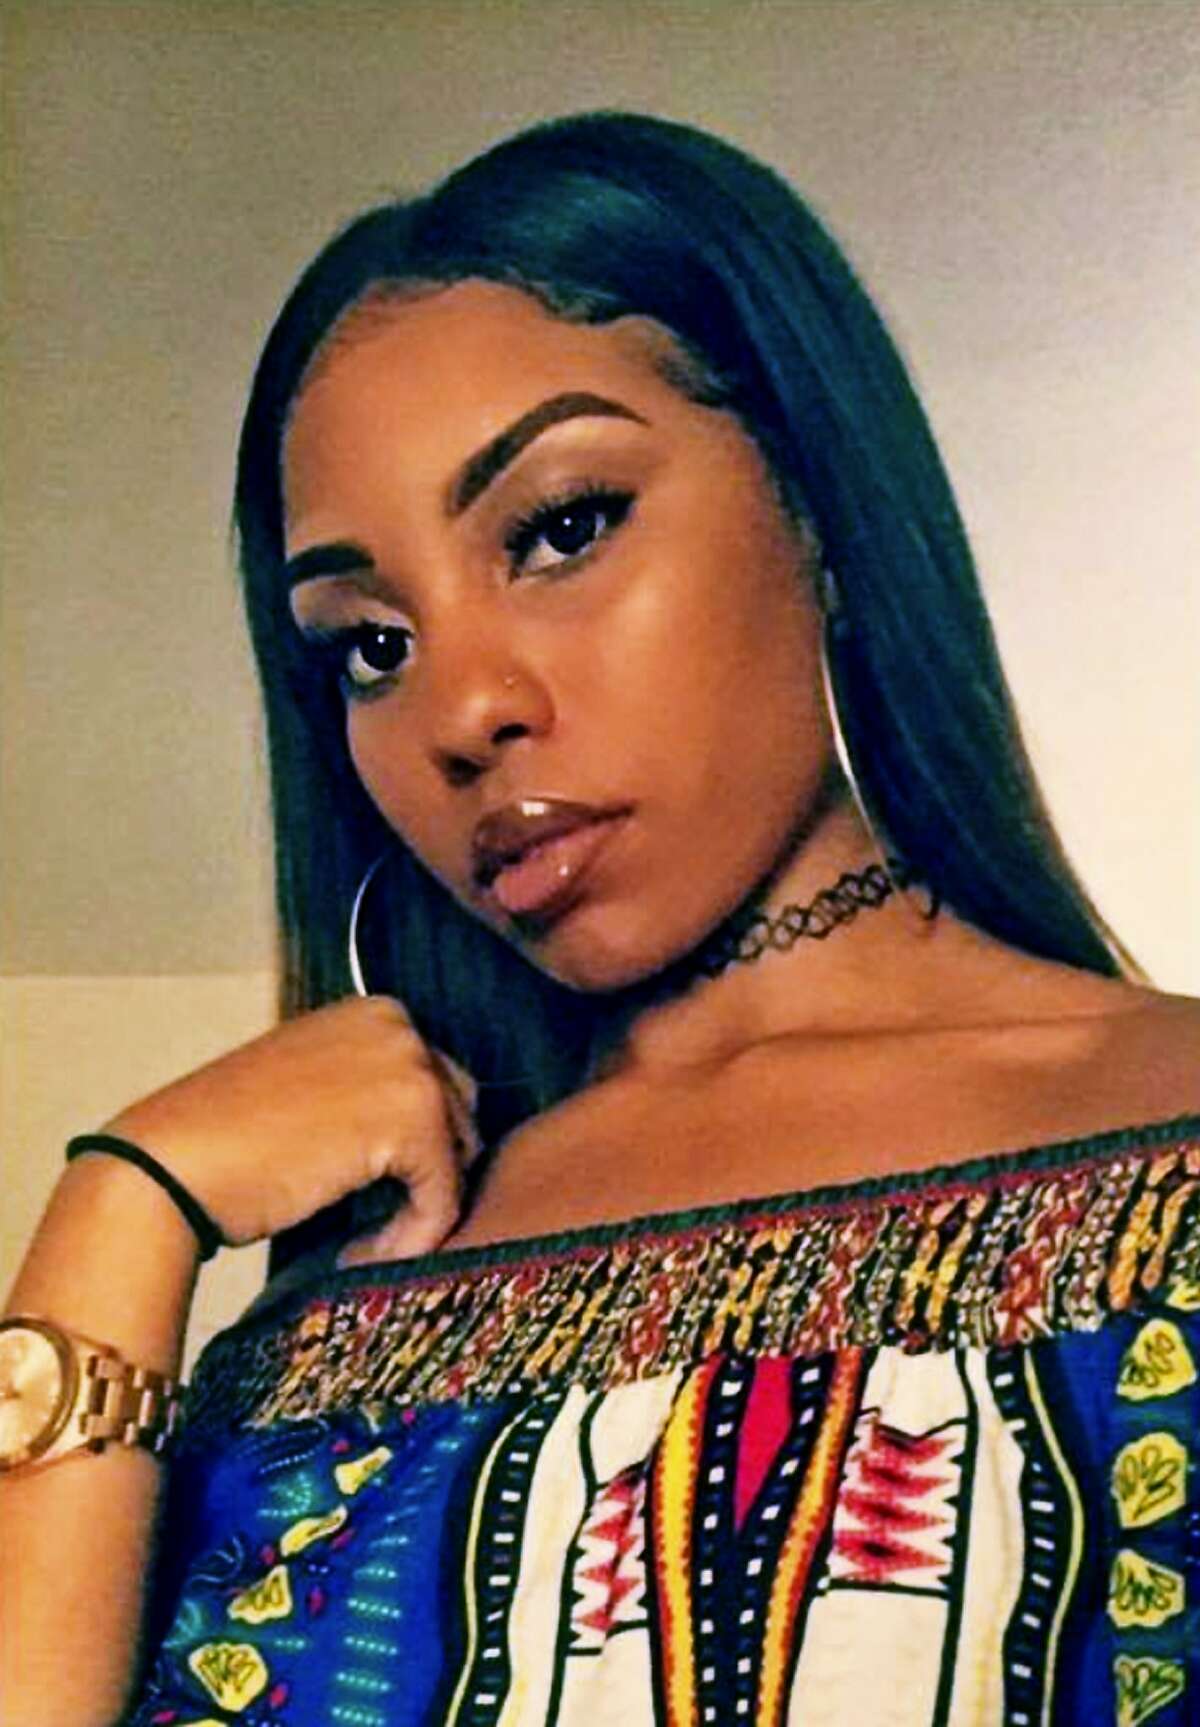 This July 3, 2017, photo provided by Ebony Monroe shows her cousin Nia Wilson in a selfie, who was killed in an unprovoked stabbing attack at a Bay Area Rapid Transit station in Oakland, Calif., Sunday, July 22, 2018.